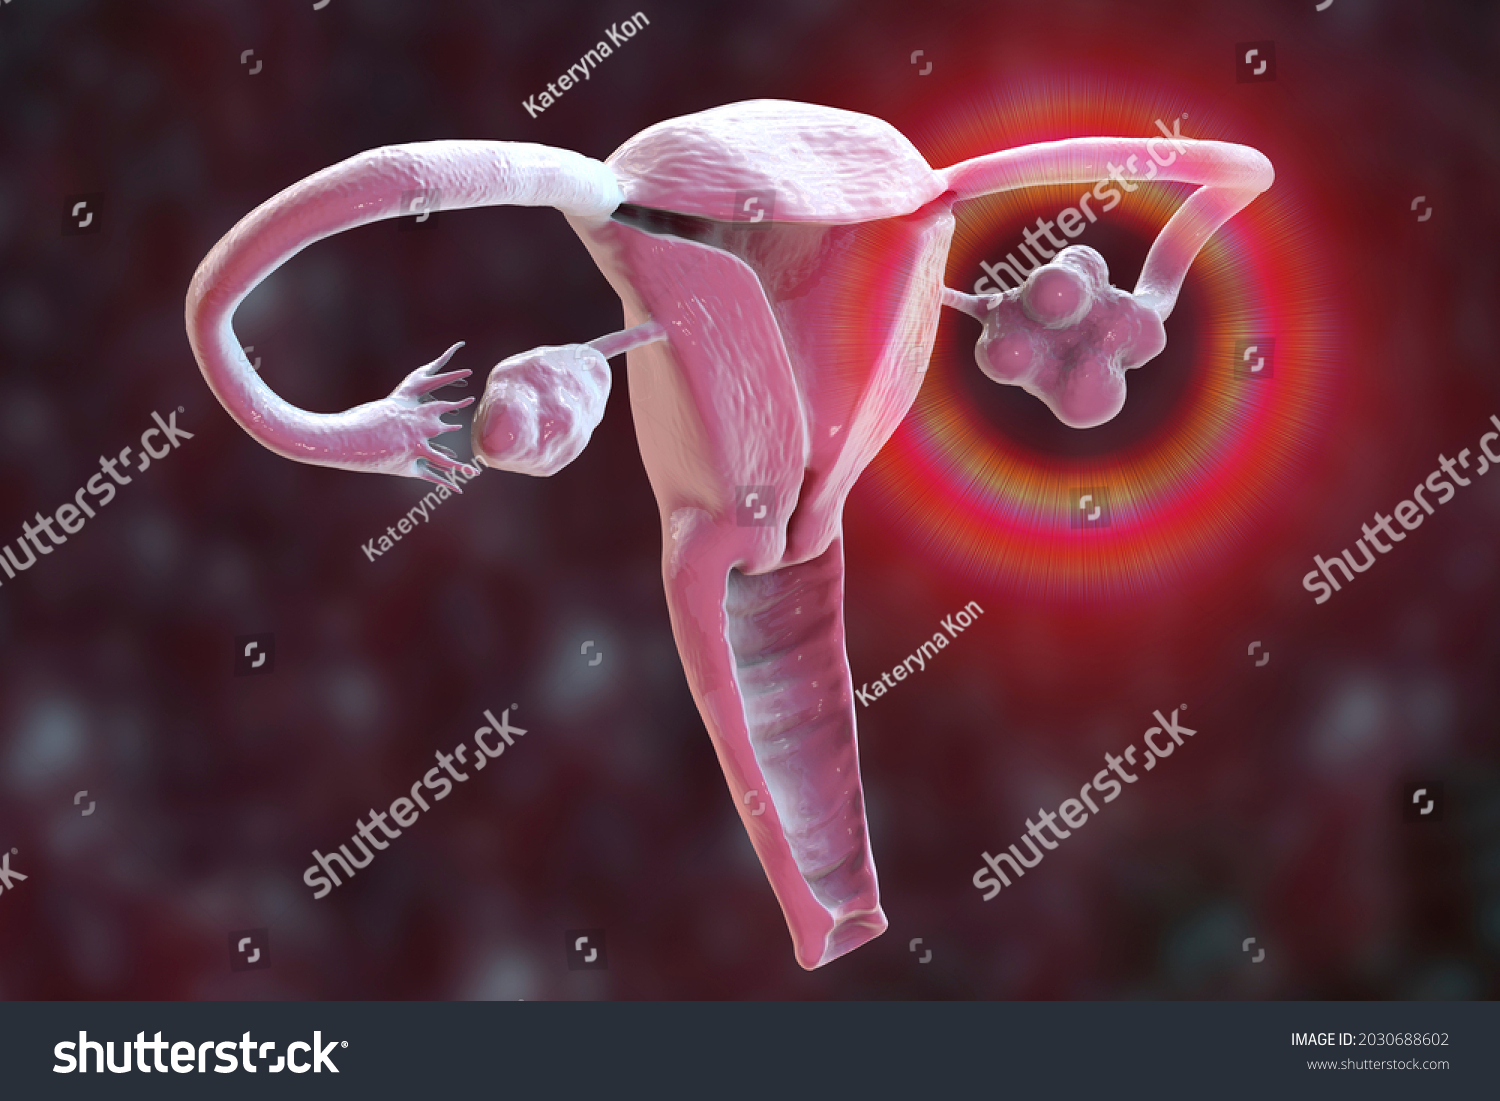 Polycystic Ovary Syndrome 3d Illustration Showing Stock Illustration ...